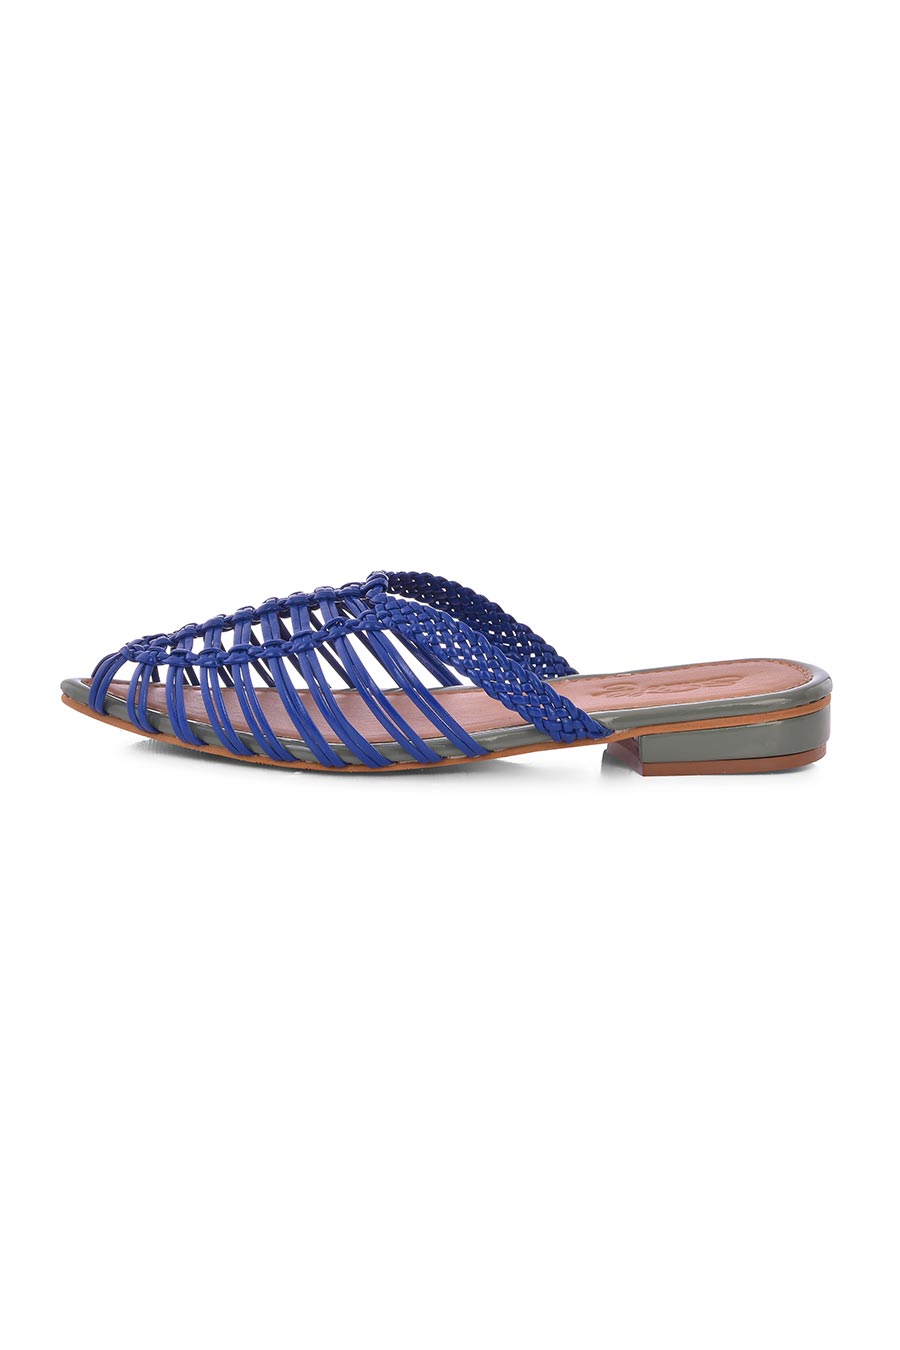 Woven Electric Blue Pointed Flats